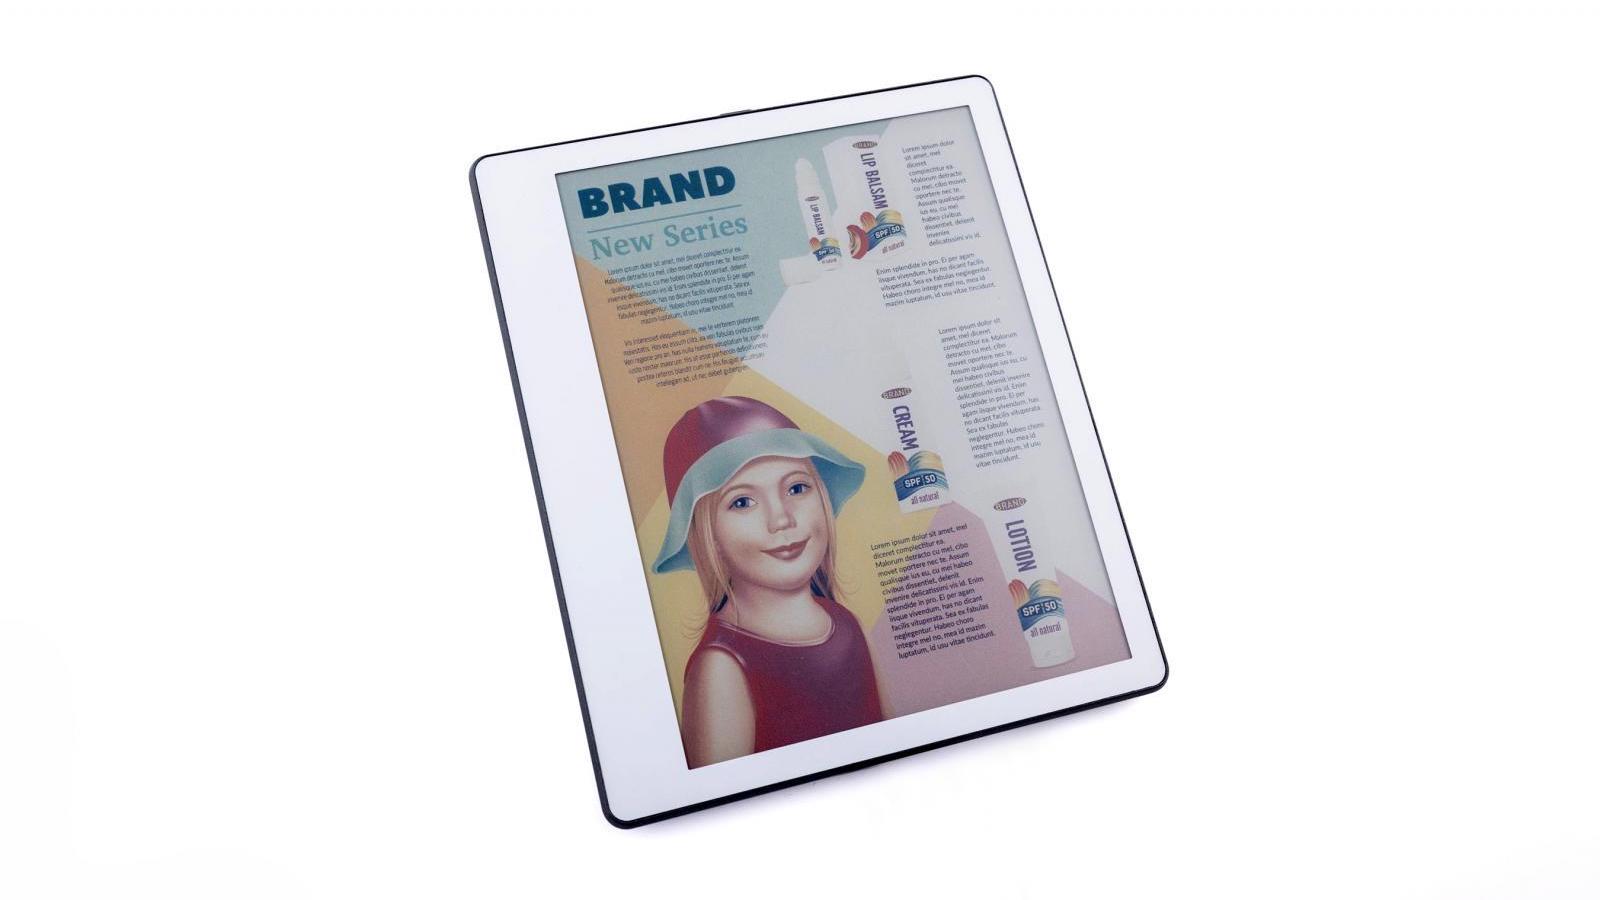 E-ink has a 40 Screen in the Works - The Digital Reader